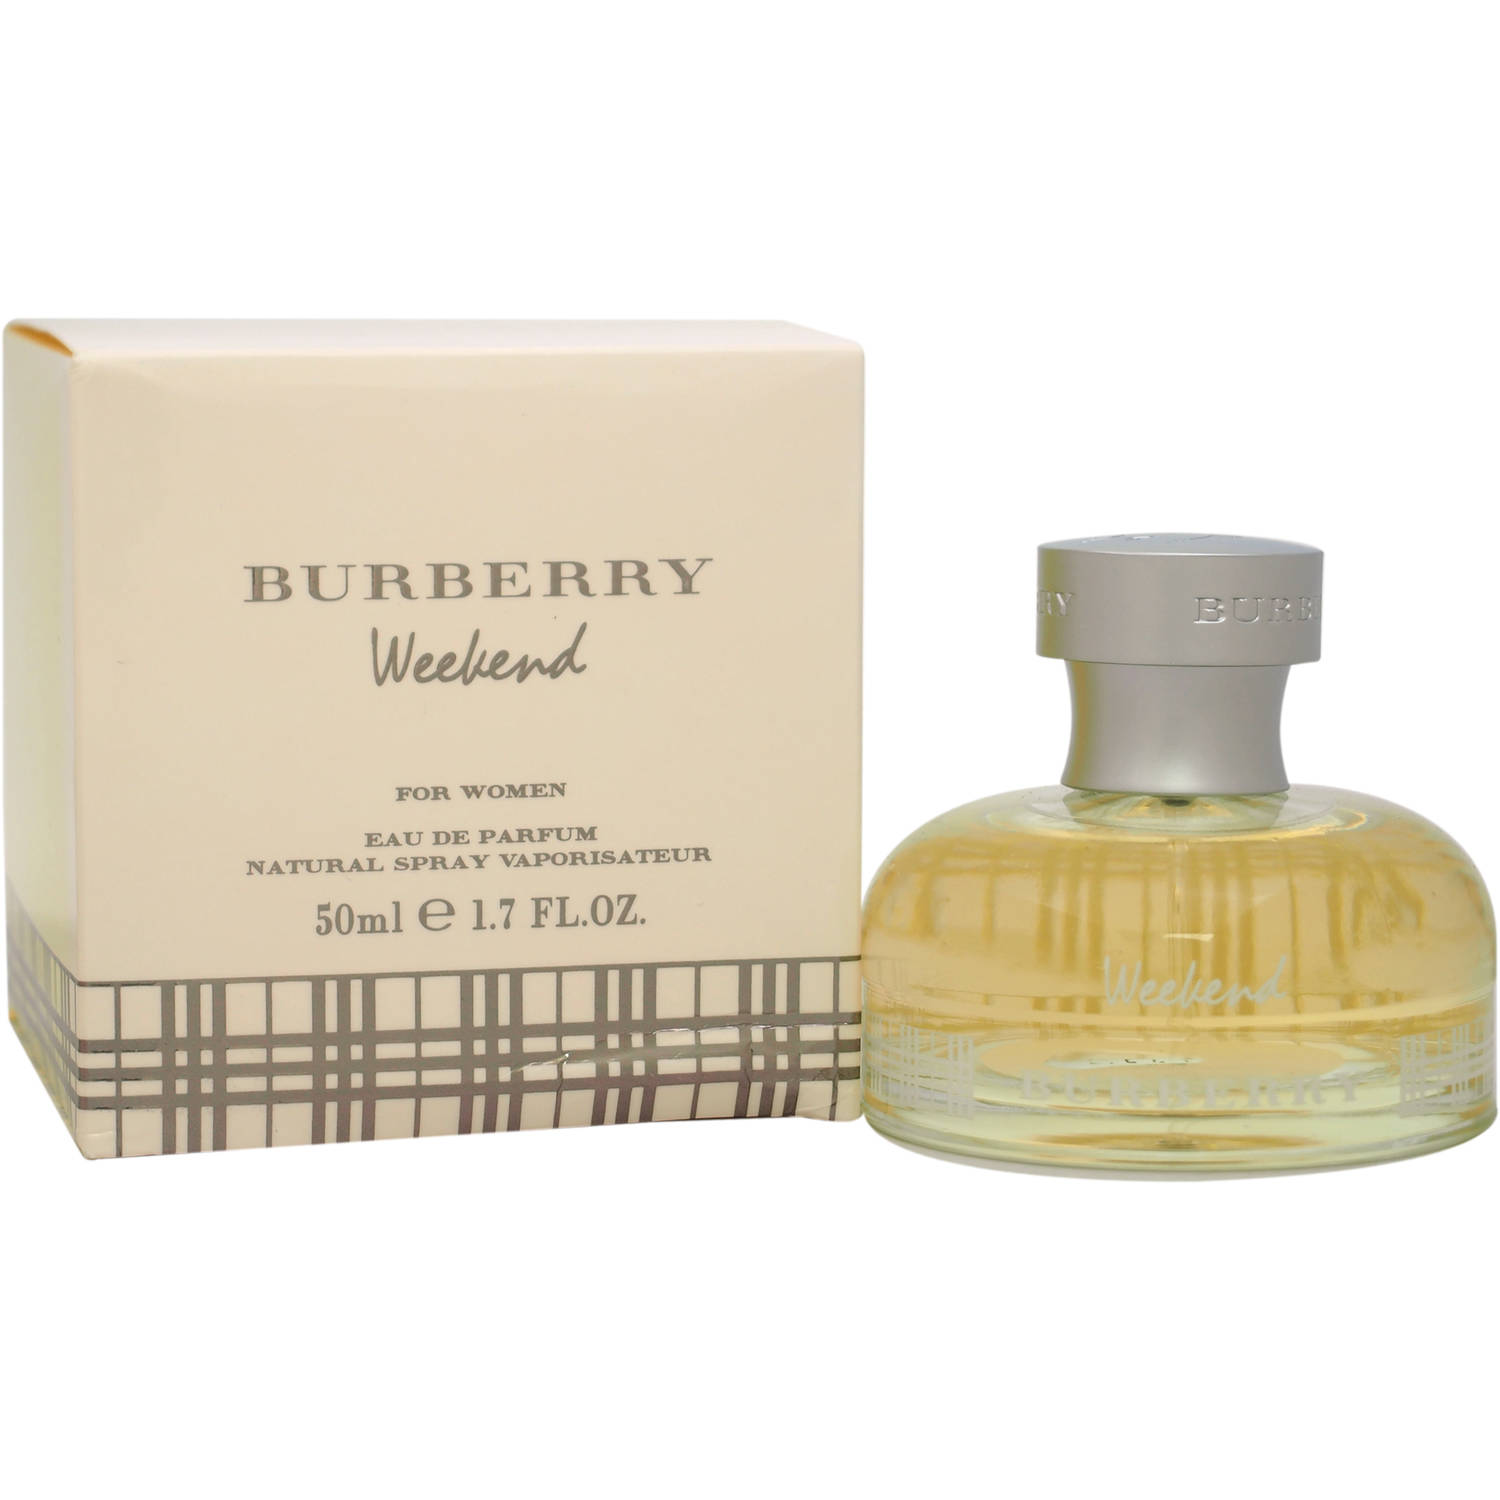 Burberry Weekend by Burberry for Women - 1.7 oz EDP Spray - image 2 of 2